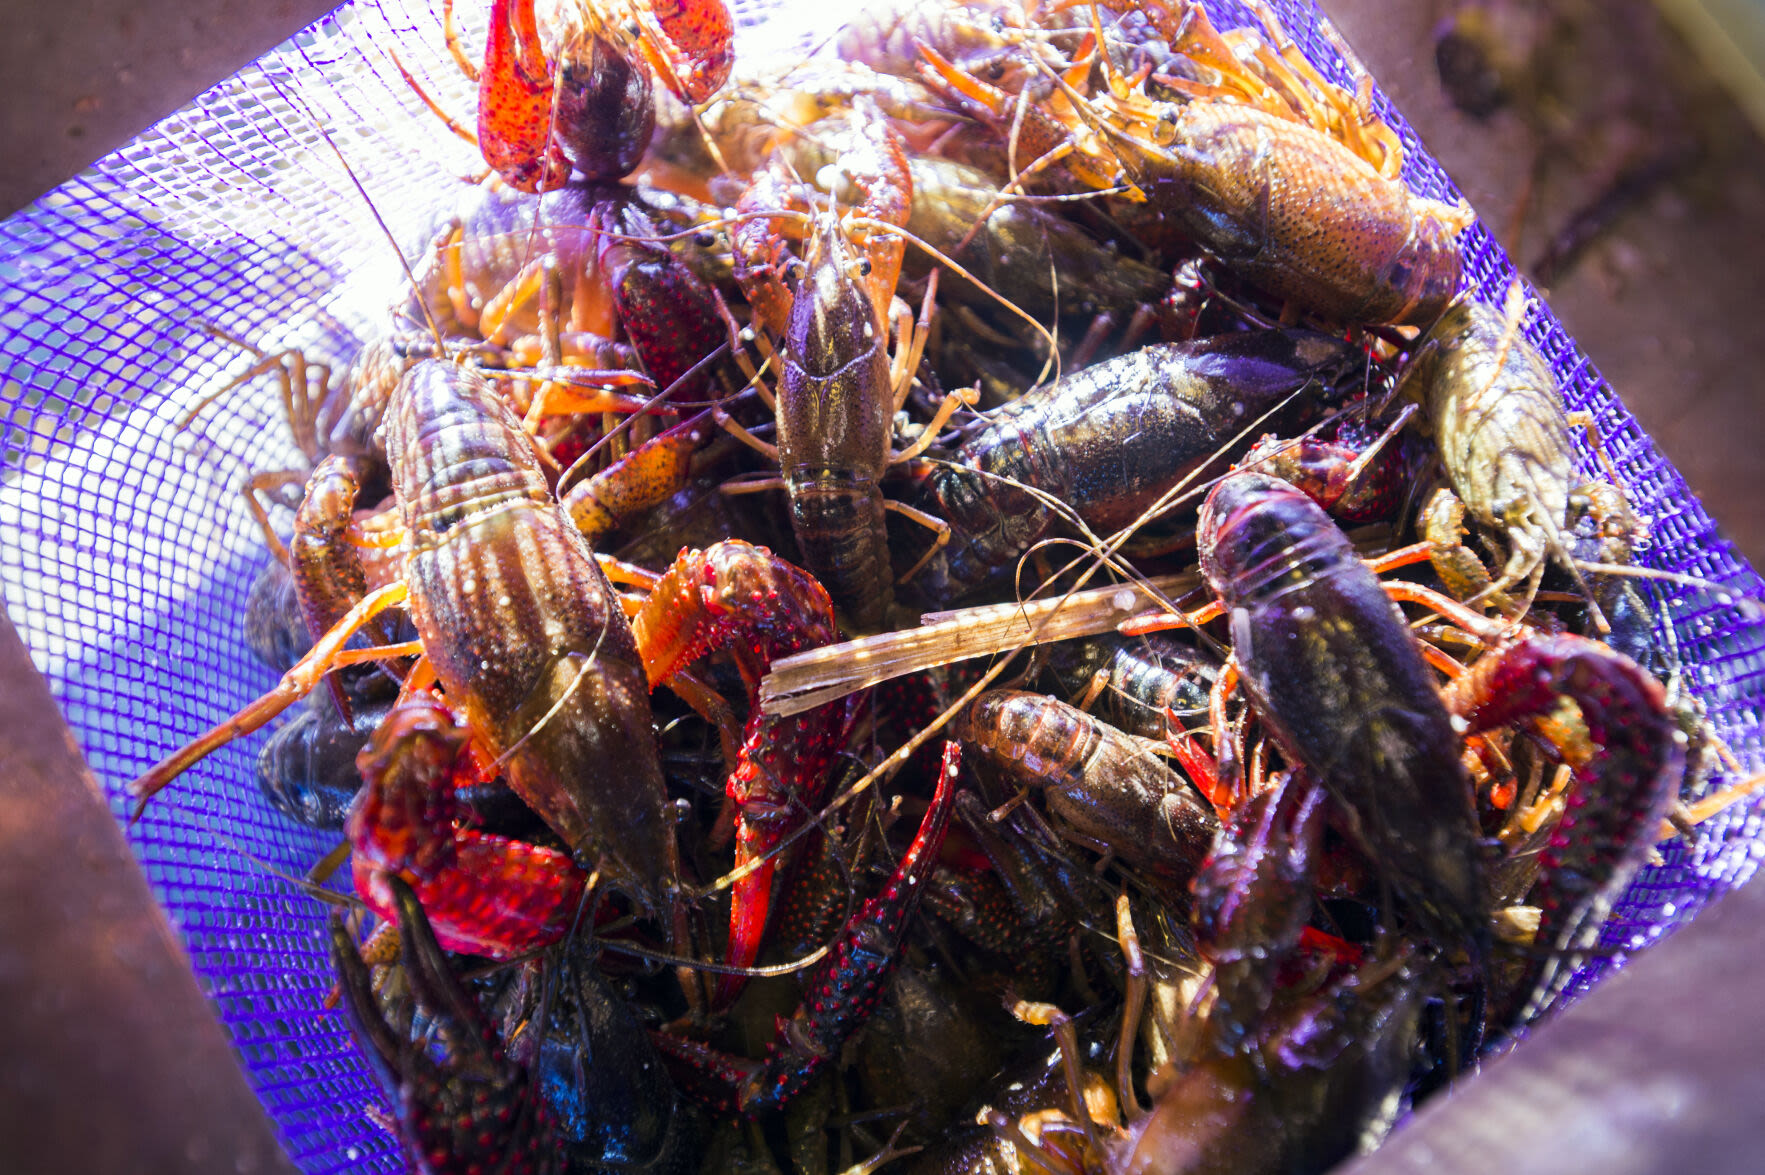 Five men accused of repeatedly stealing crawfish from traps in Lafayette Parish